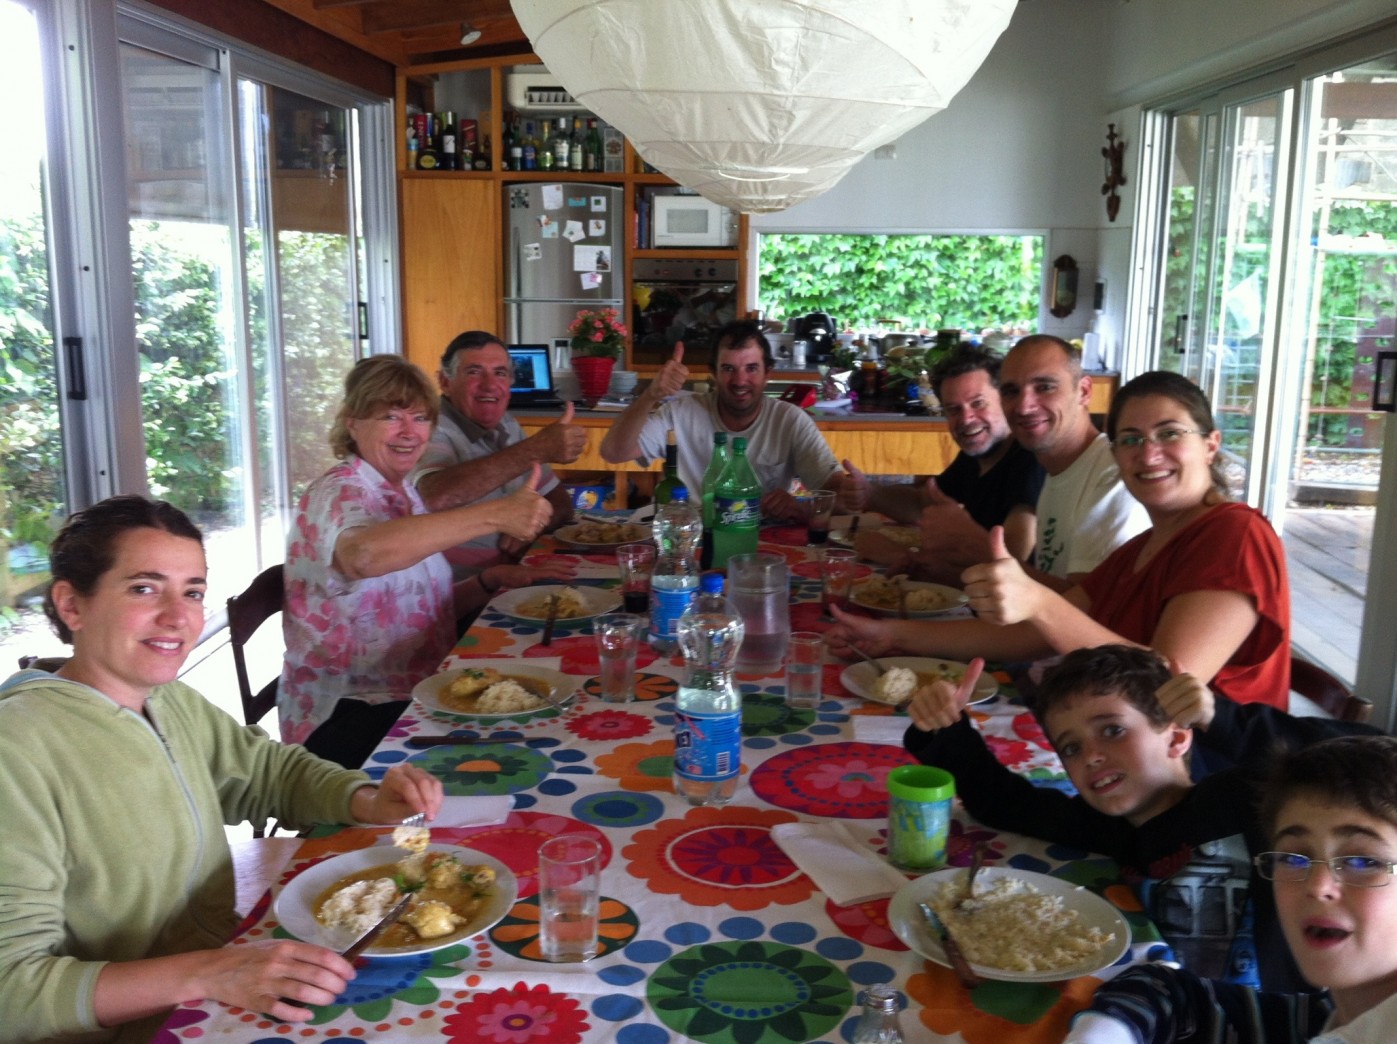 Llonch- Vidalle Family enjoying my Coconut curry in Argentina.